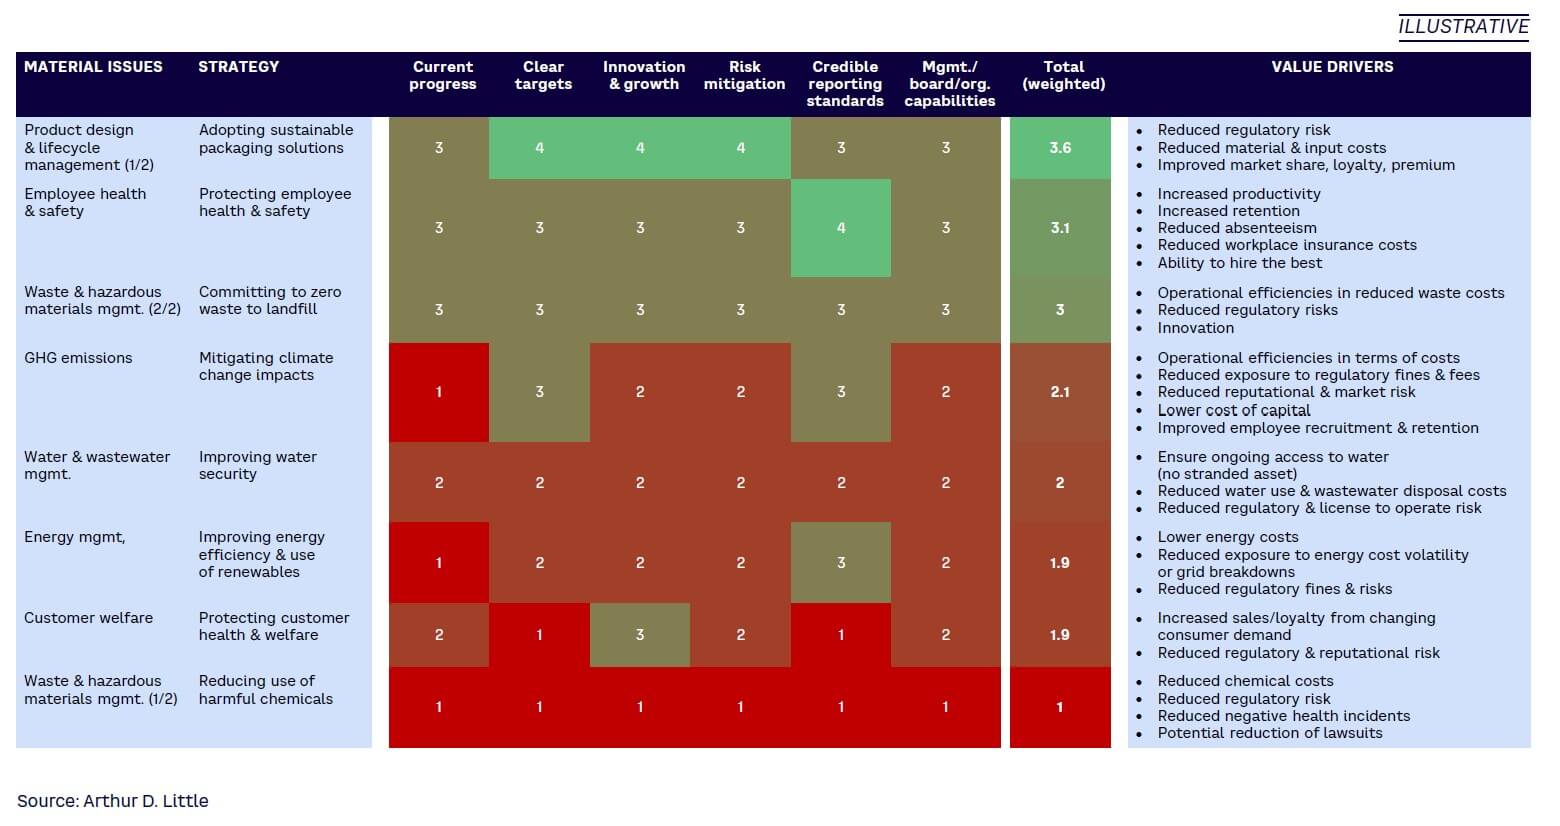 Figure 3. Heat map output from phase 1 due diligence tool